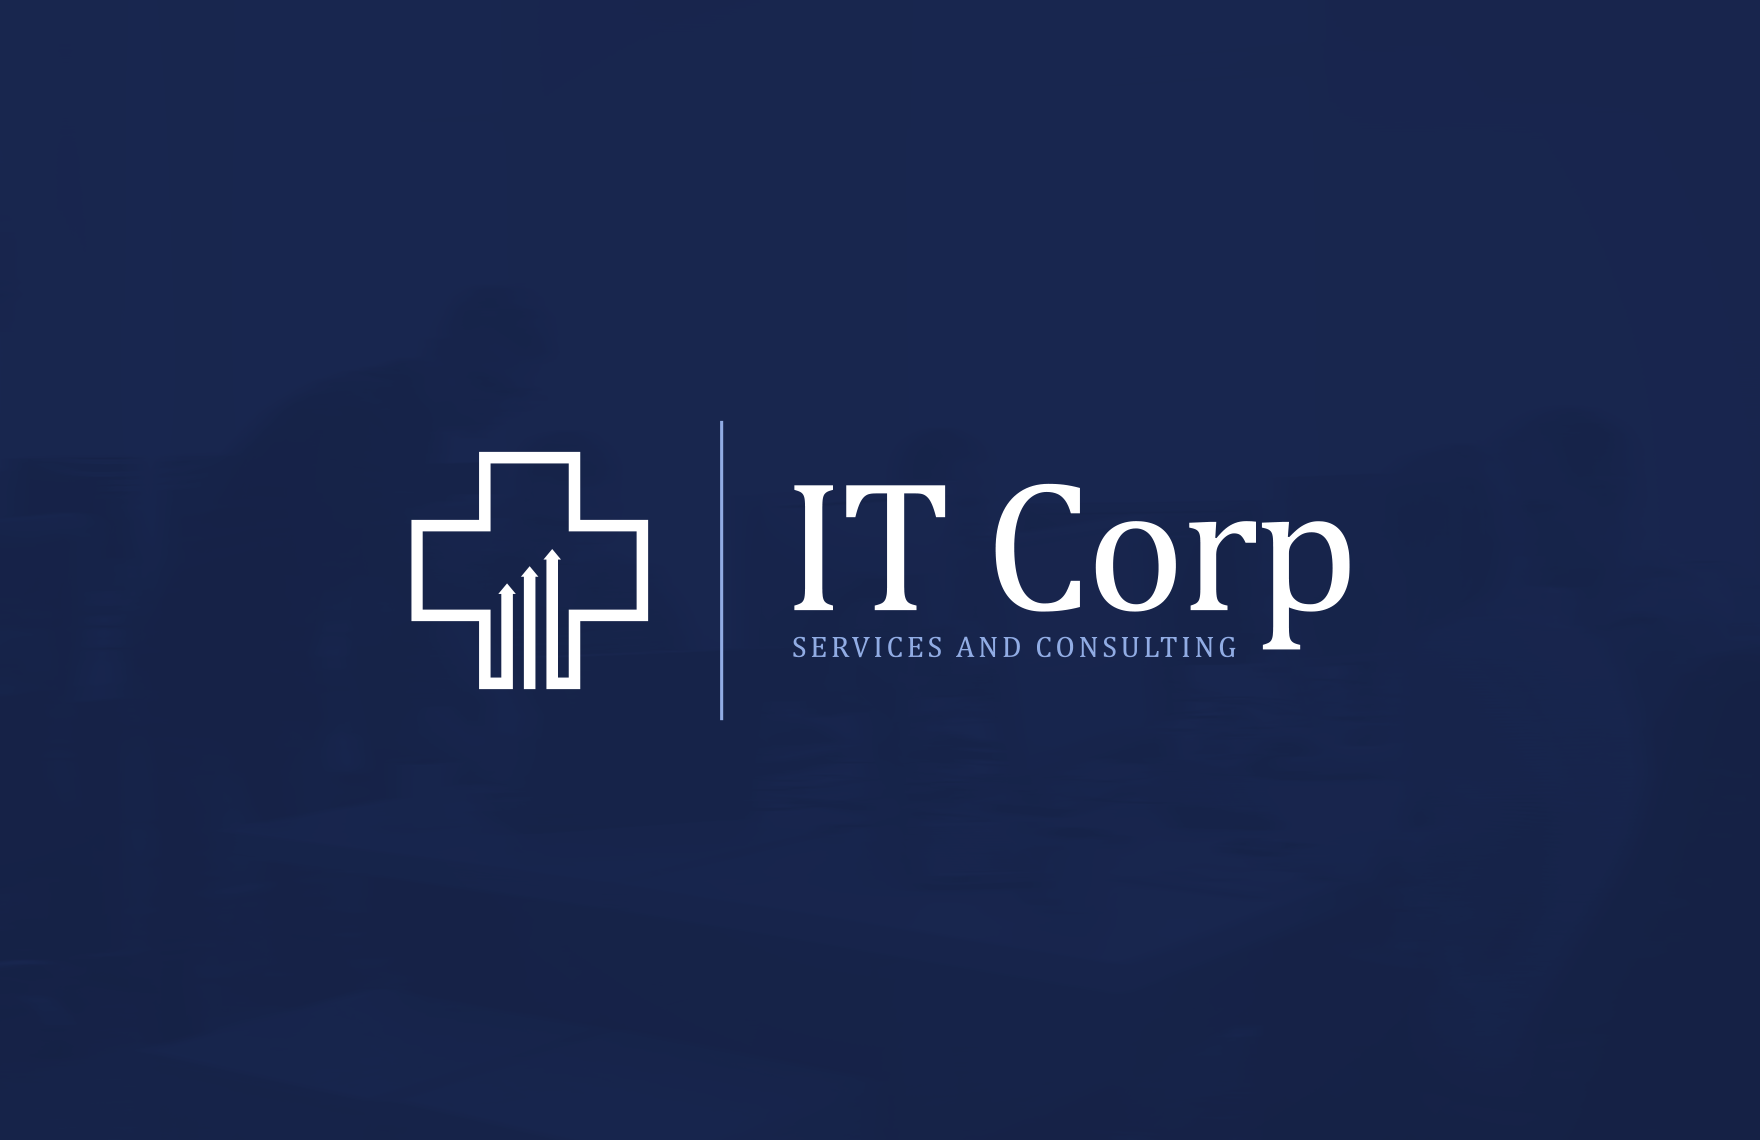 Healthcare IT Consulting Logo Template in Word, Illustrator, PSD, SVG, PNG